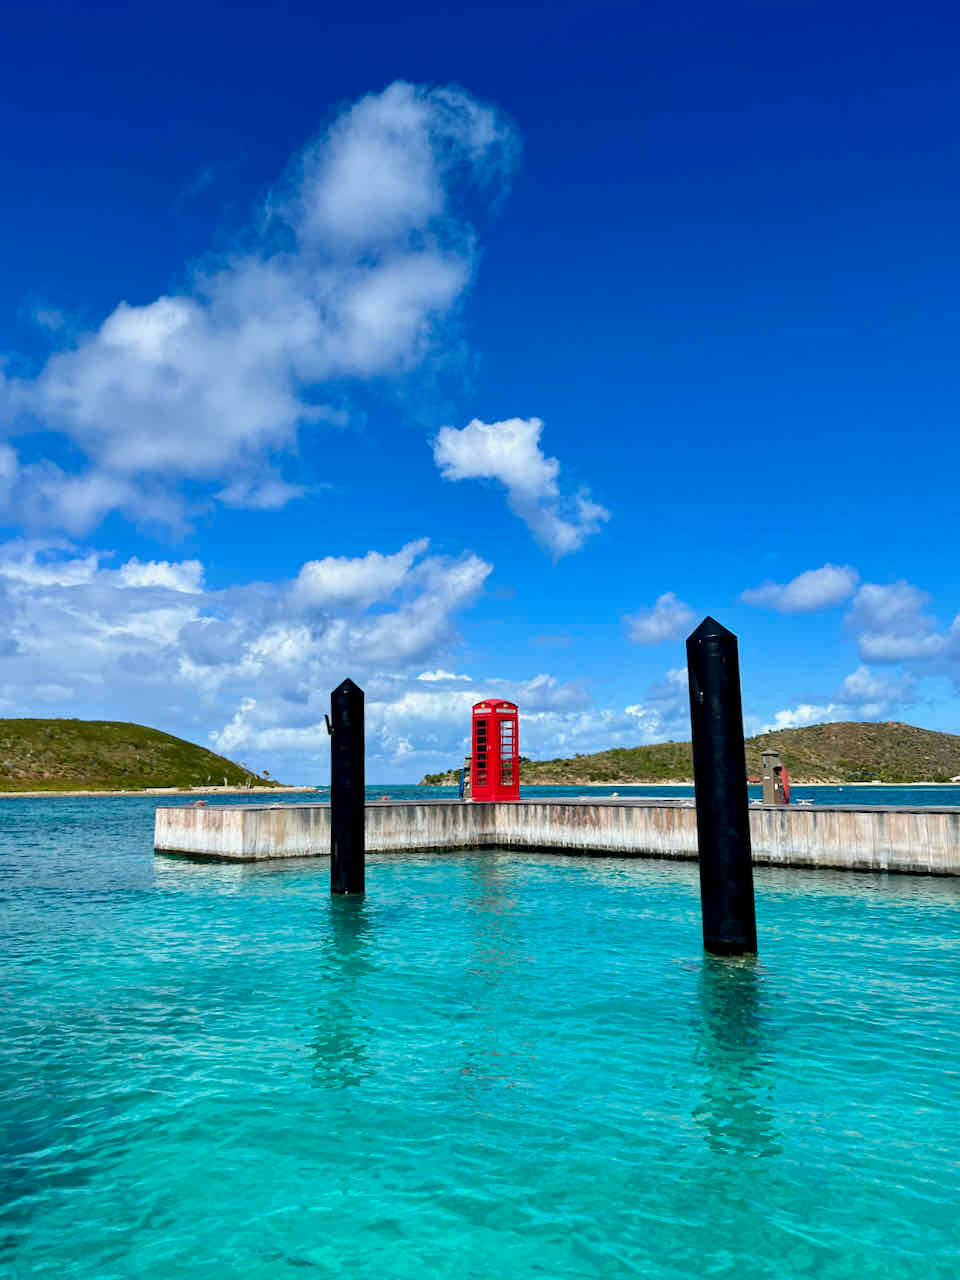 Red phone booth at Saba Rock in the British Virgin Islands with bright blue turquoise water.